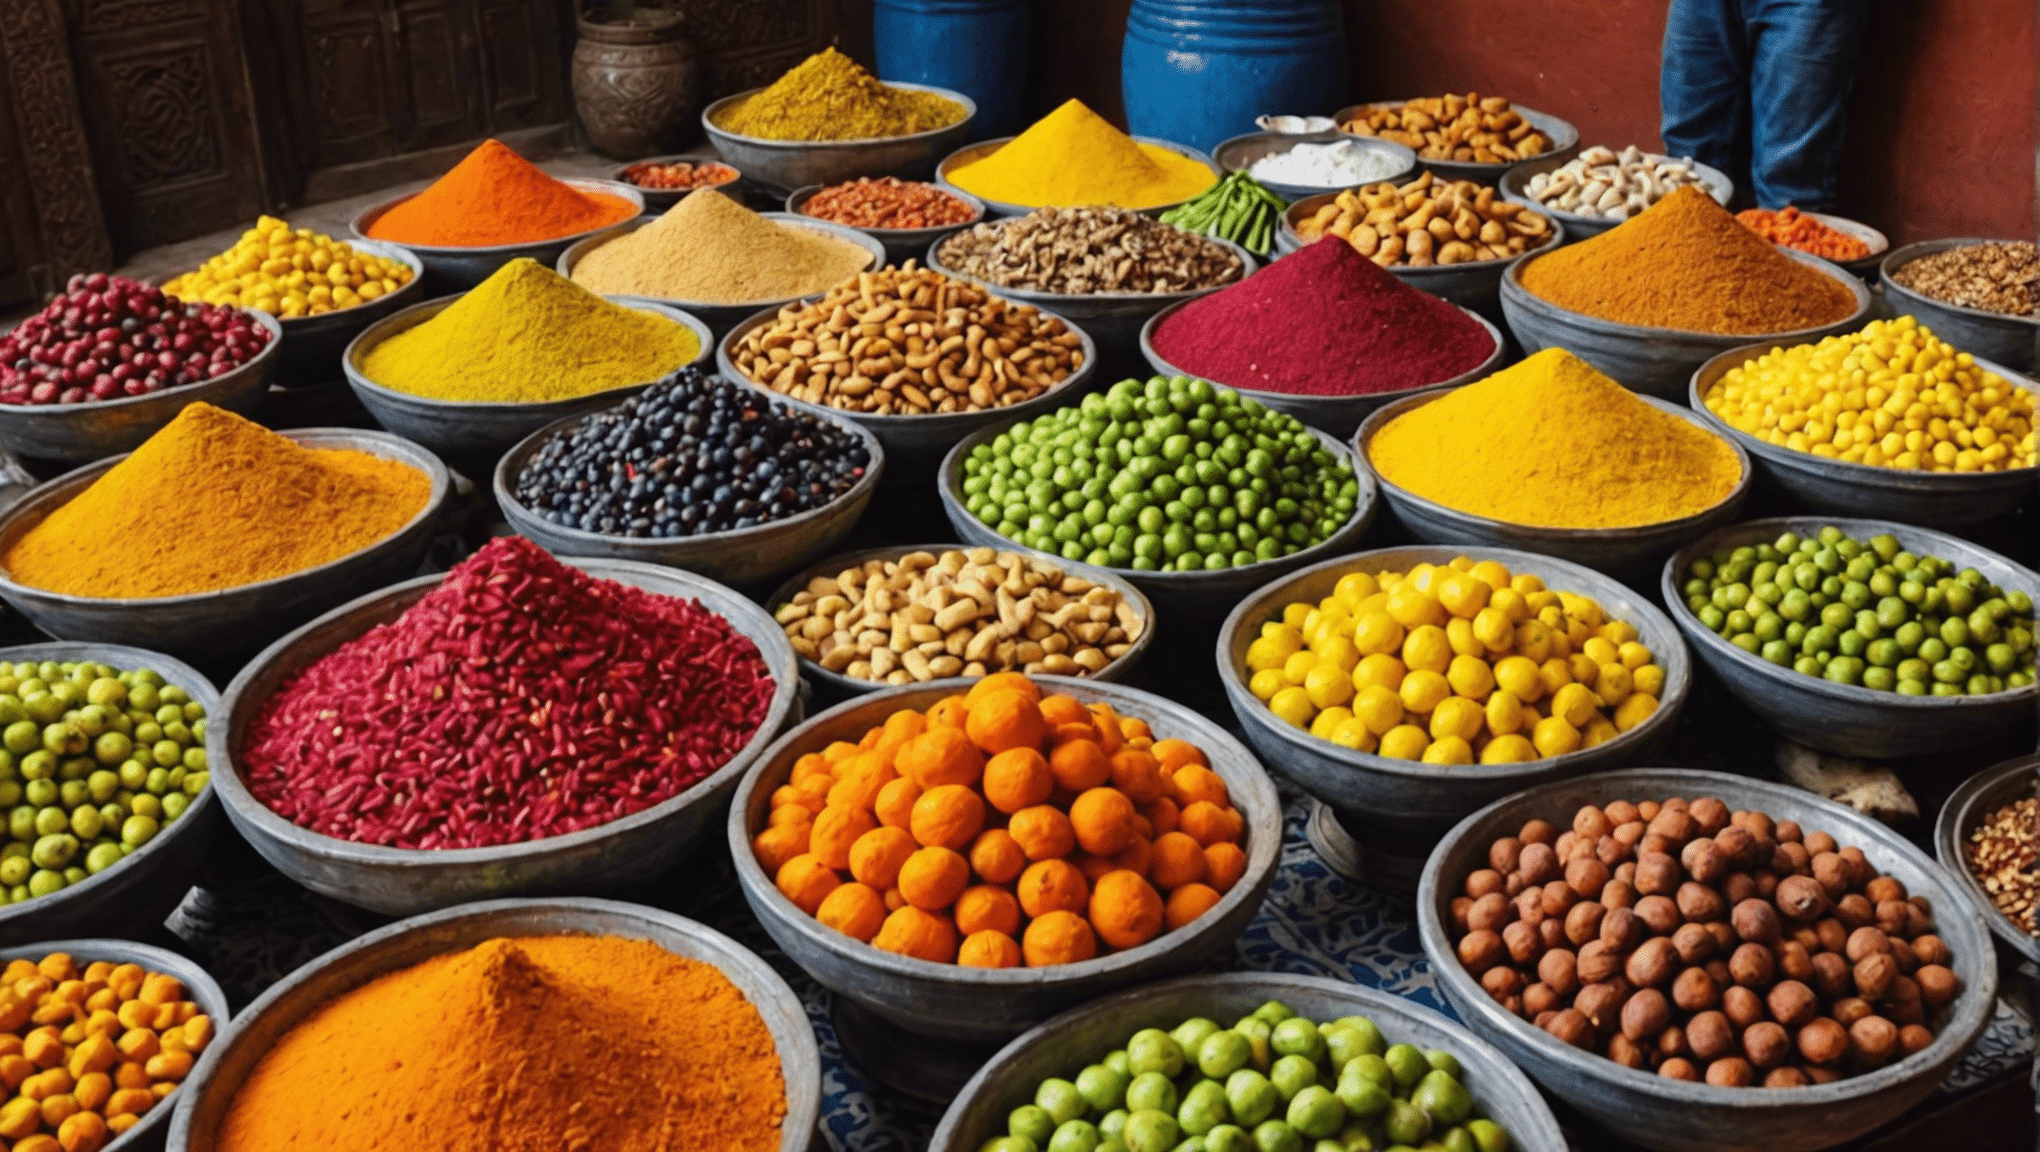 indulge in marrakech's most exotic delicacies and test your bravery with unique culinary experiences. discover the fearless foodie in you!